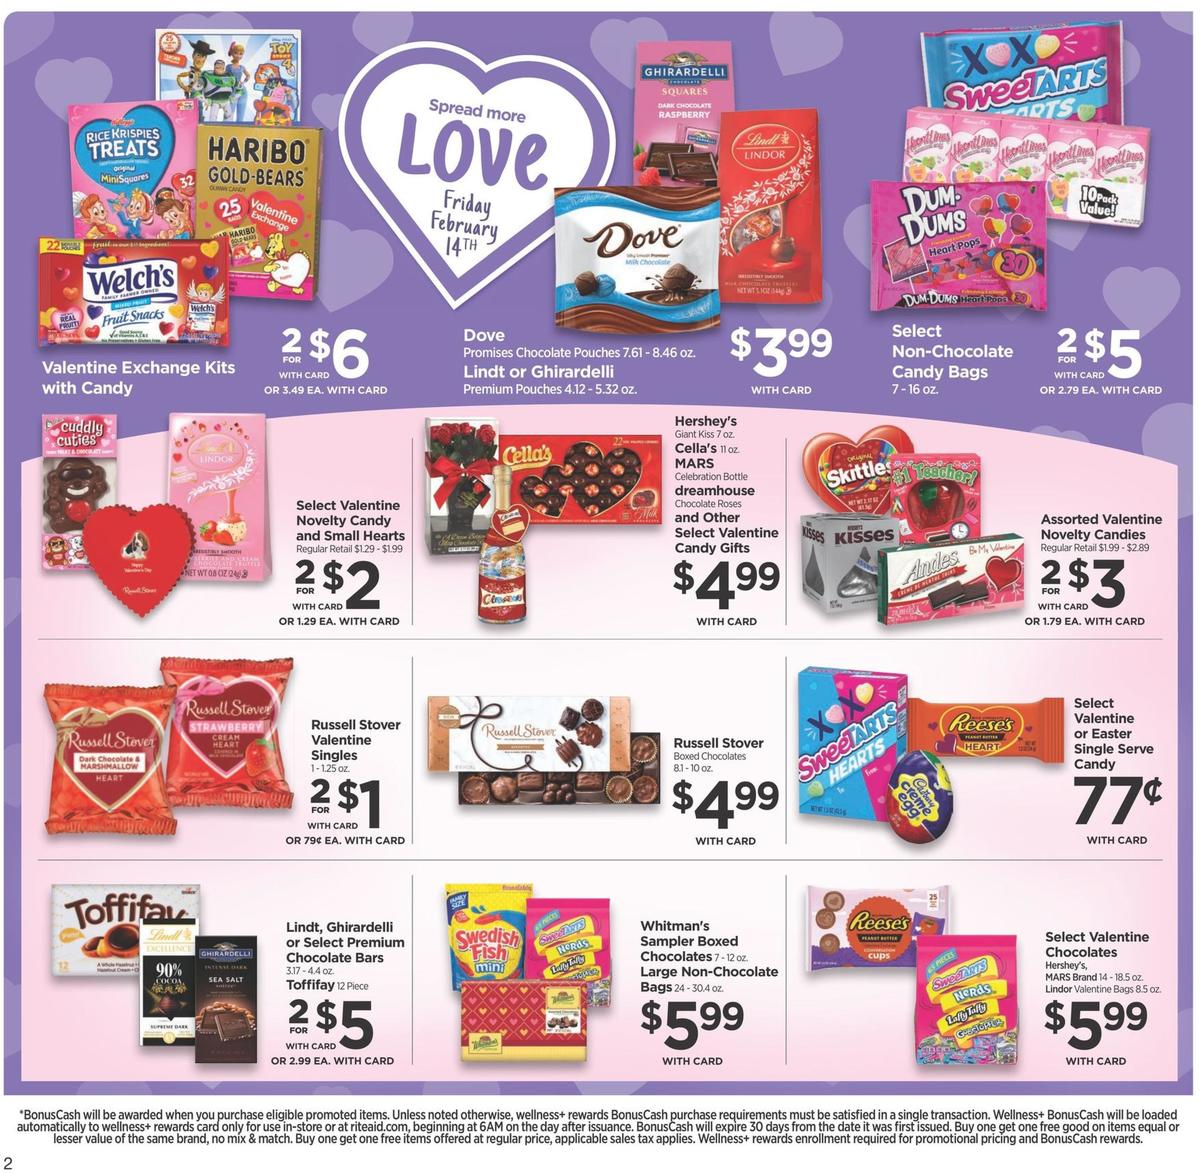 Rite Aid Weekly Ad from January 26